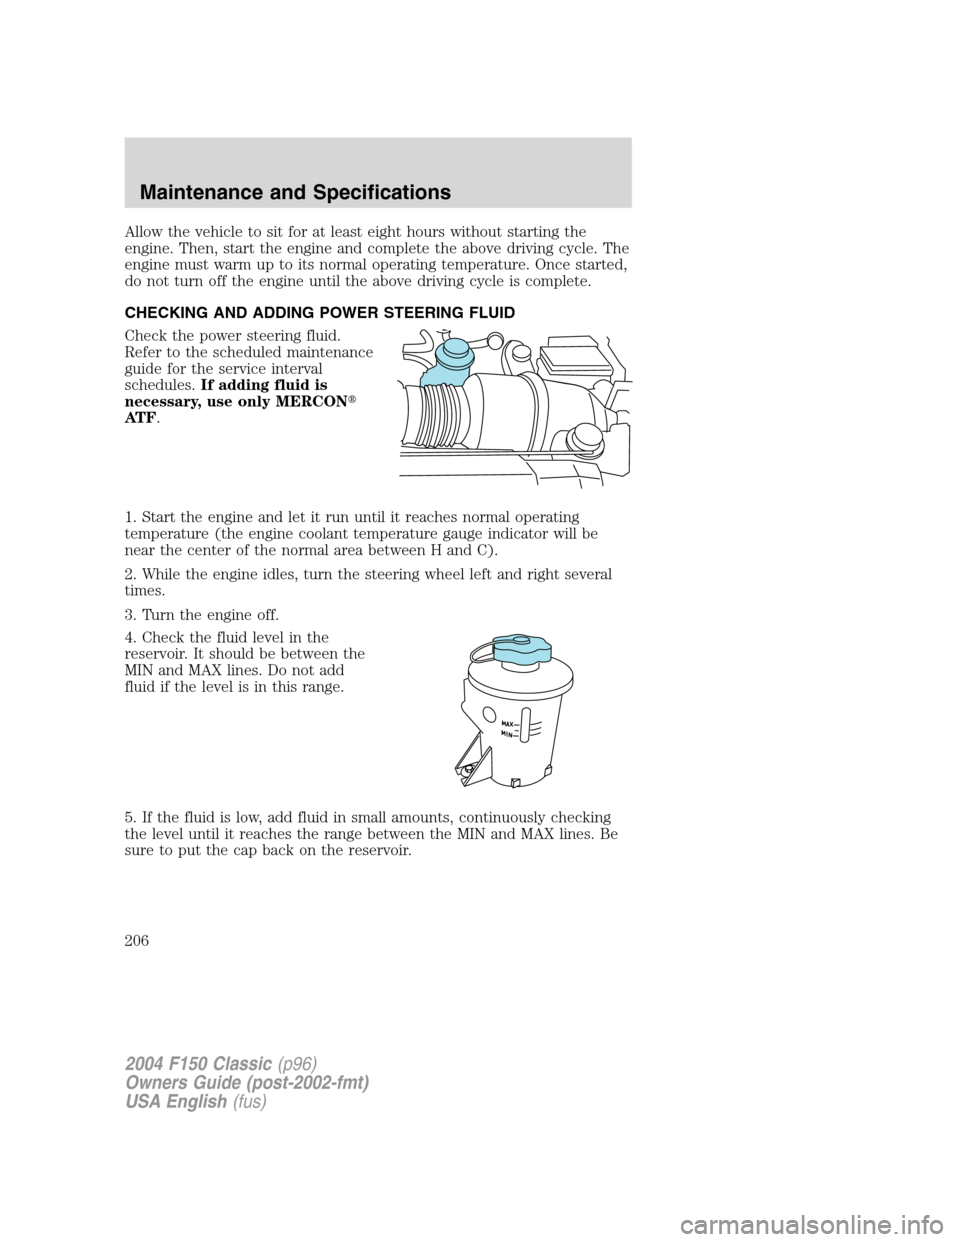 FORD F150 2004 11.G Herritage Owners Manual Allow the vehicle to sit for at least eight hours without starting the
engine. Then, start the engine and complete the above driving cycle. The
engine must warm up to its normal operating temperature.